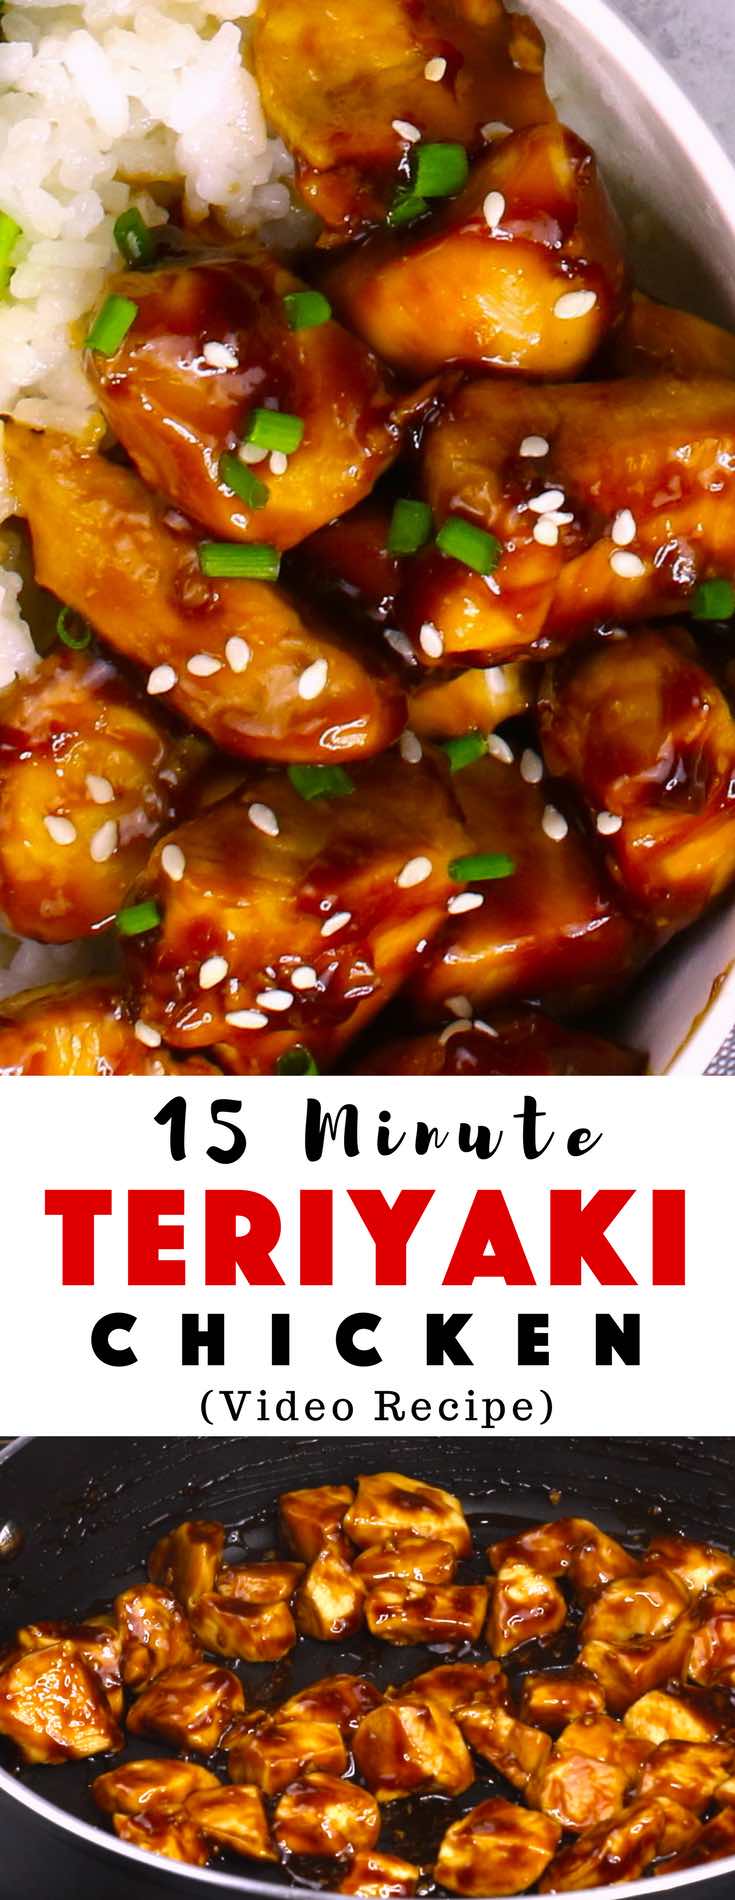 The easiest, most unbelievably delicious Teriyaki Chicken with Rice Bowls. And it’ll be on your dinner table in just 15 minutes. It’s much better than takeout! All you need is only a few ingredients: chicken breast, soy sauce, cider vinegar, honey and cornstarch. One of the best Asian dinner ideas! Served with rice and broccoli. Quick and easy dinner recipe. #Teriyaki #TeriyakiChicken #ChickenTeriyaki